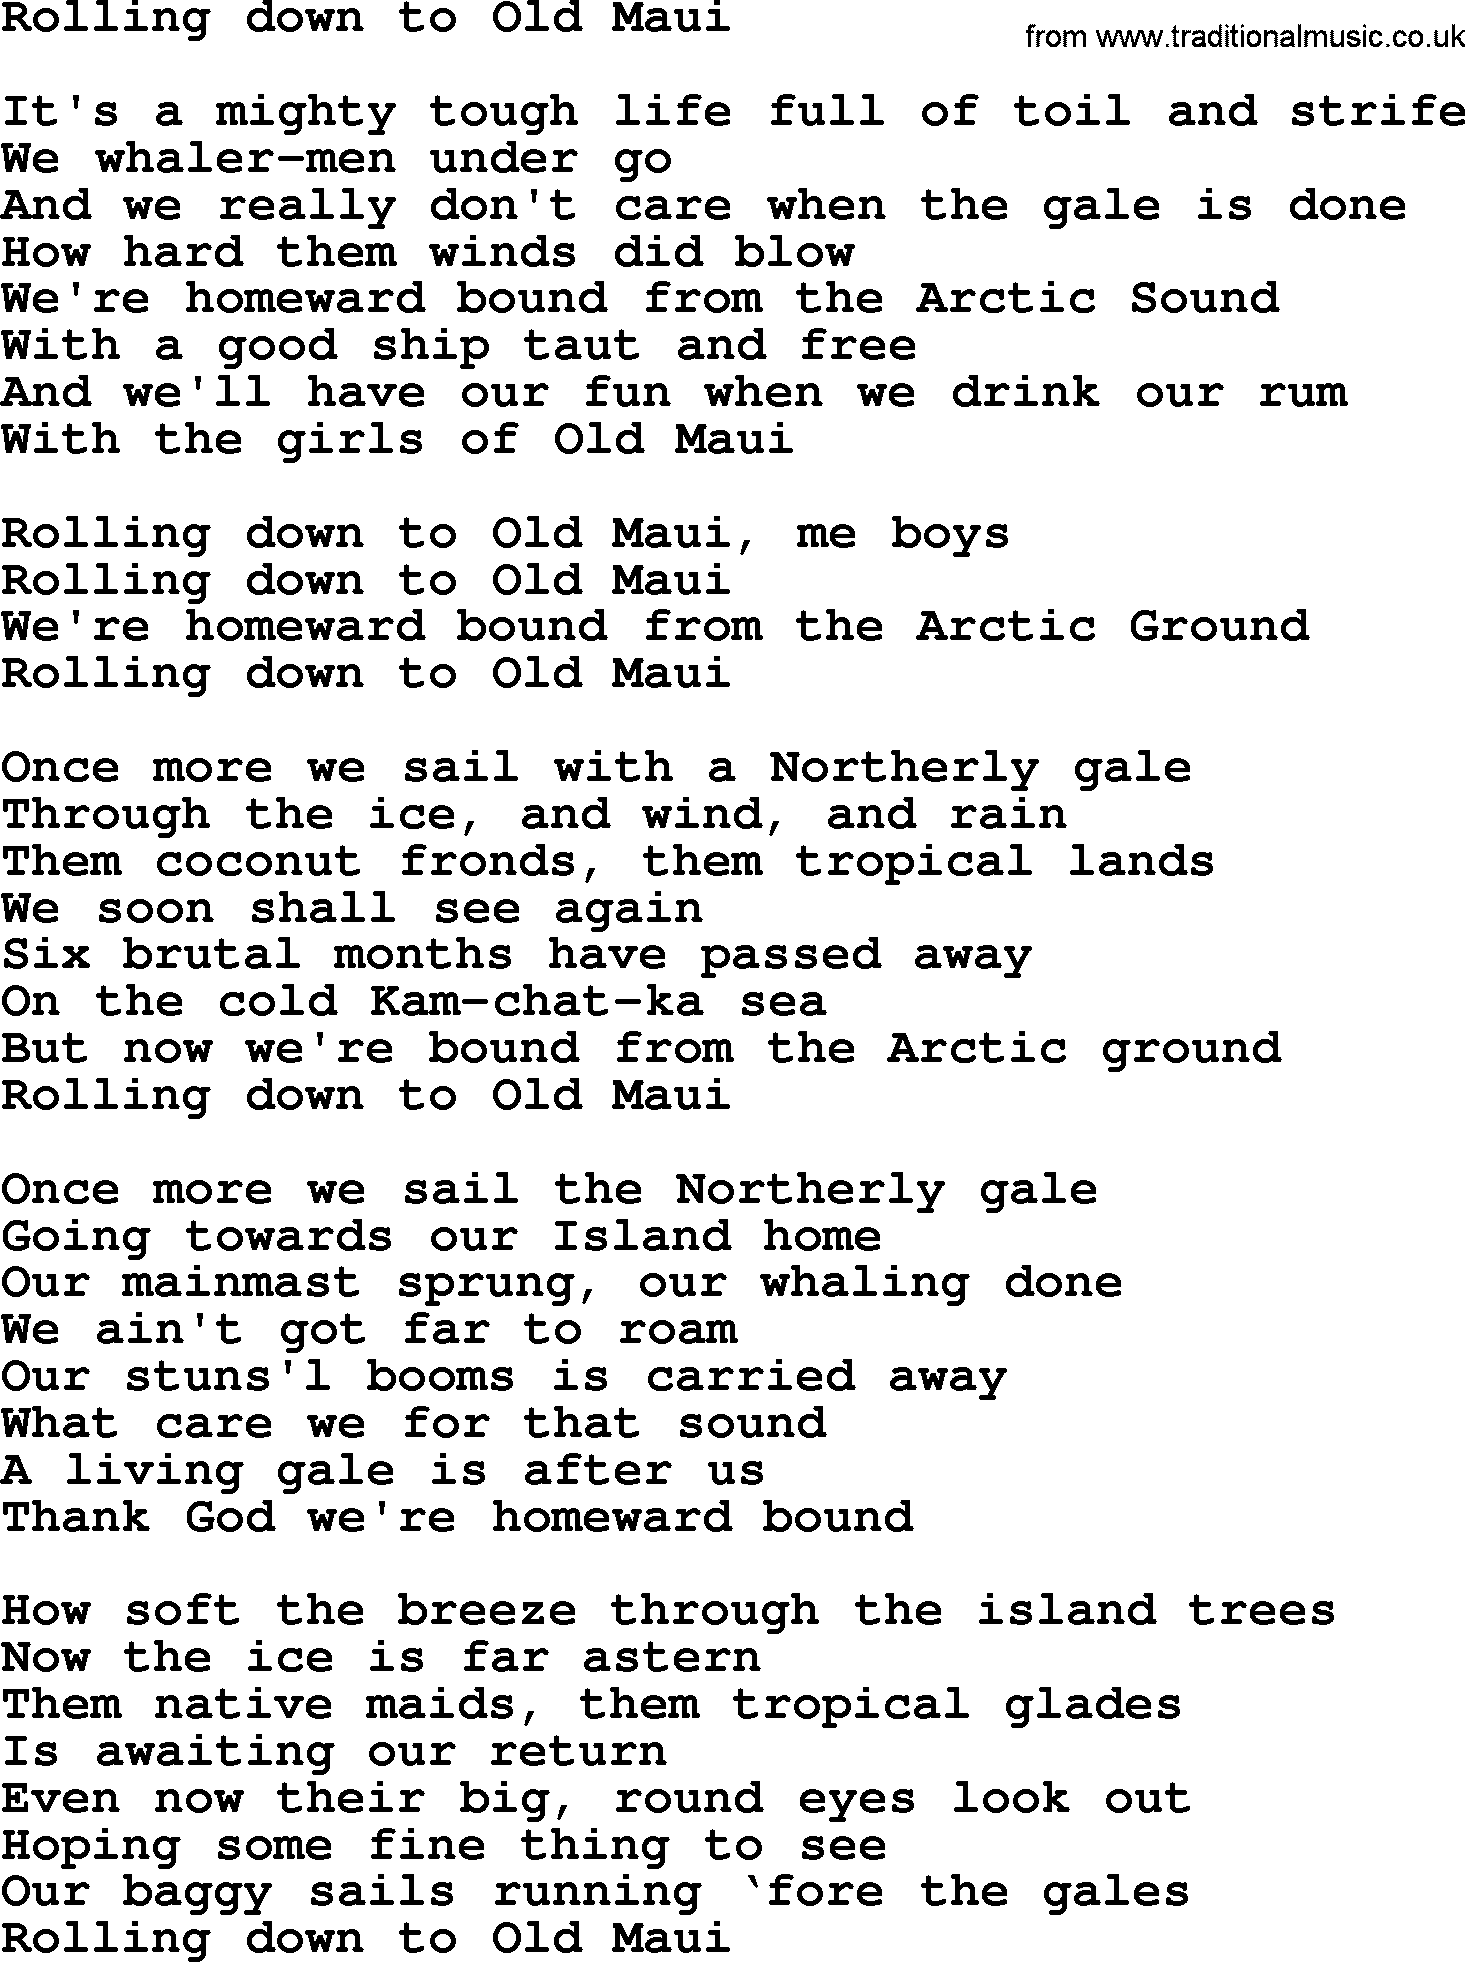 The Byrds song Rolling Down To Old Maui, lyrics